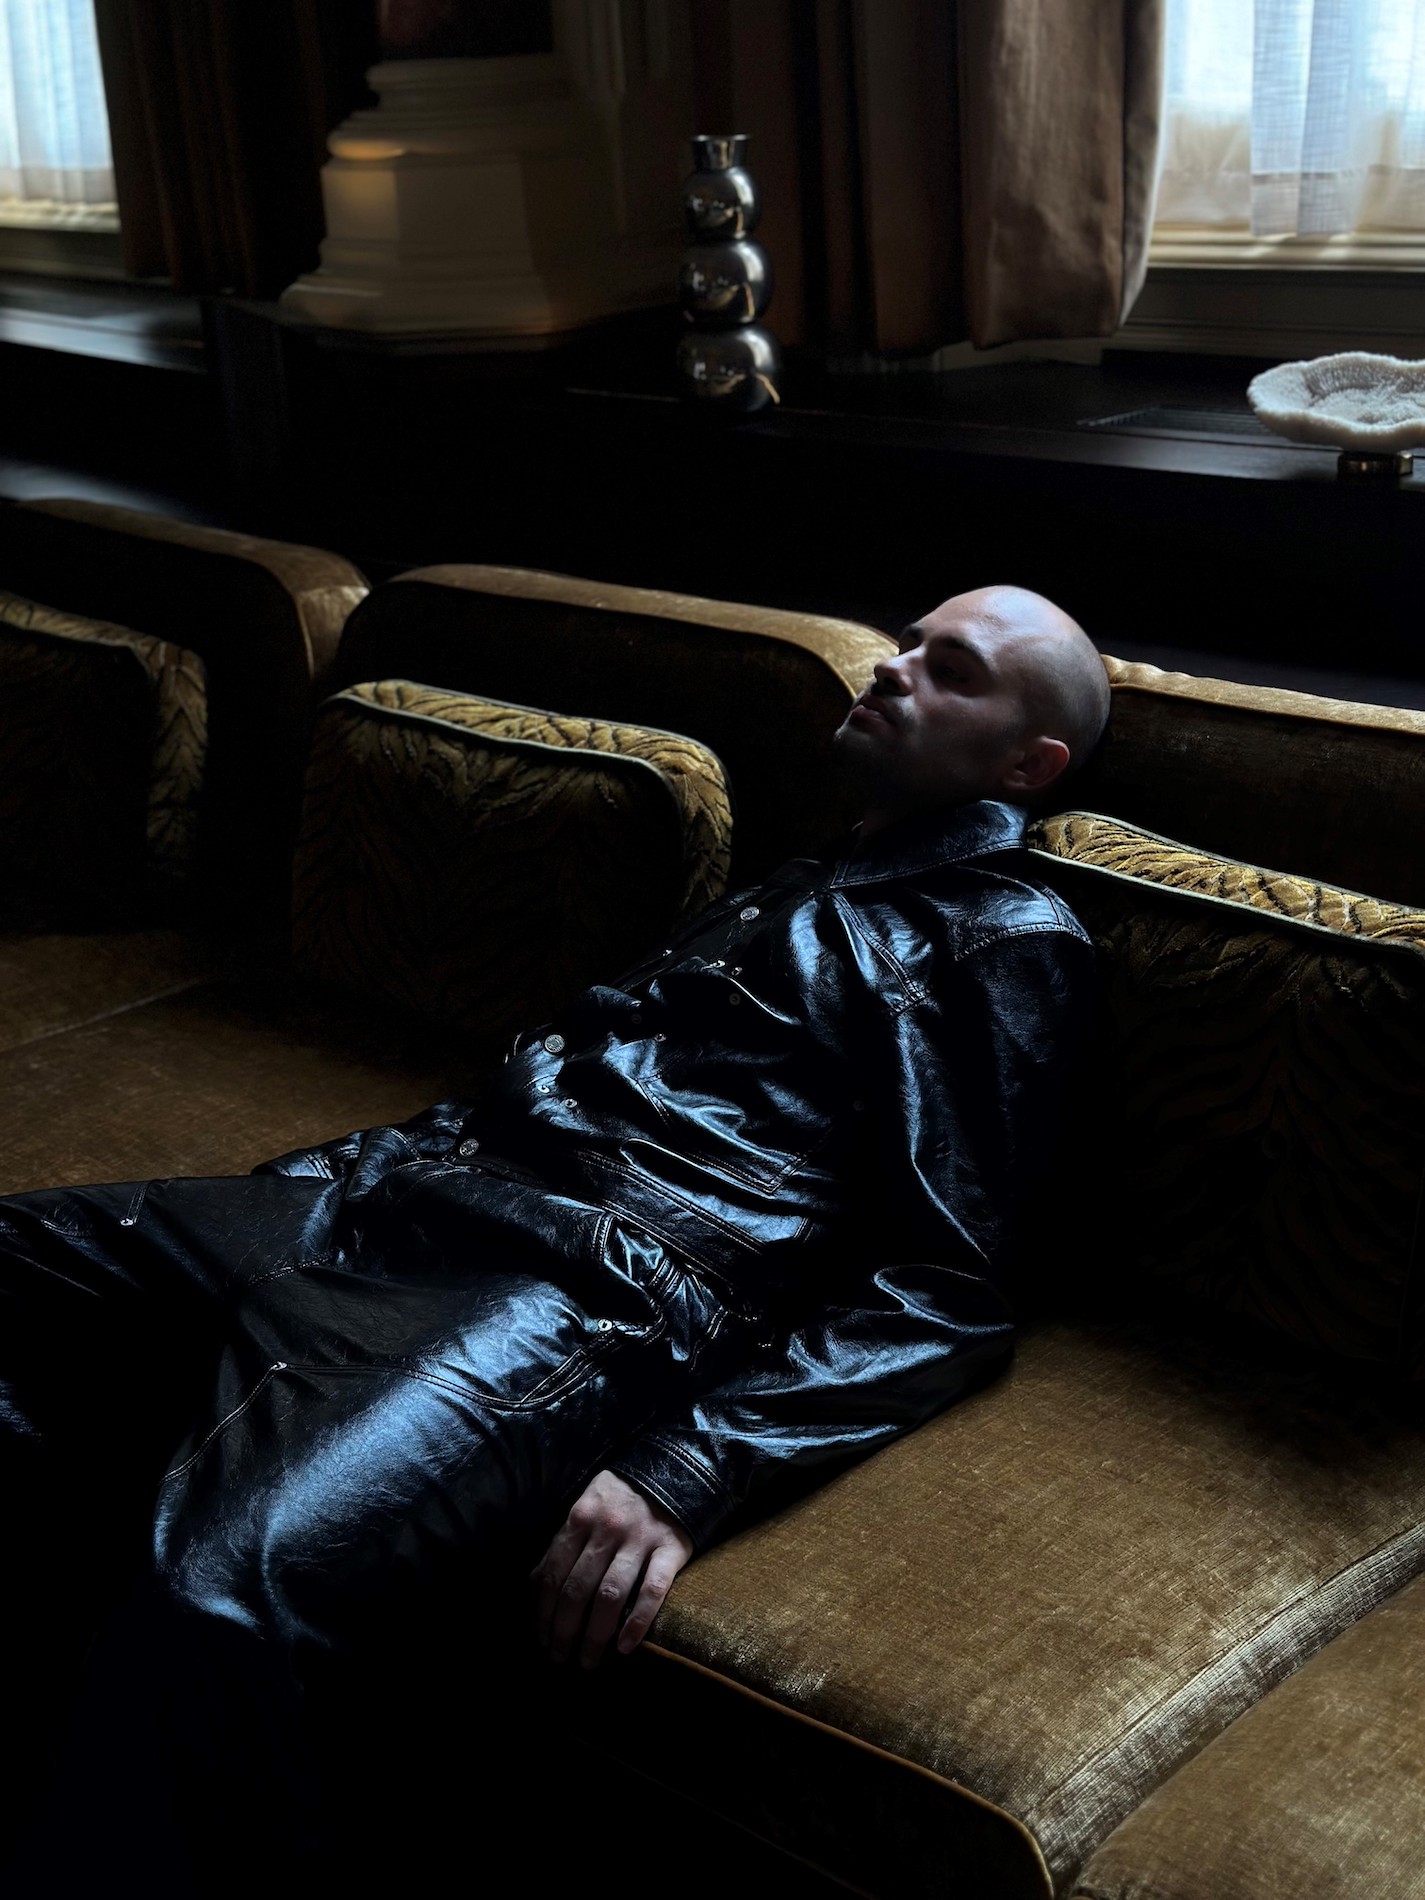 Hugo Toro photographed at the Midland Hotel in St Pancras, London, by Kim Caliot in Effect Magazine